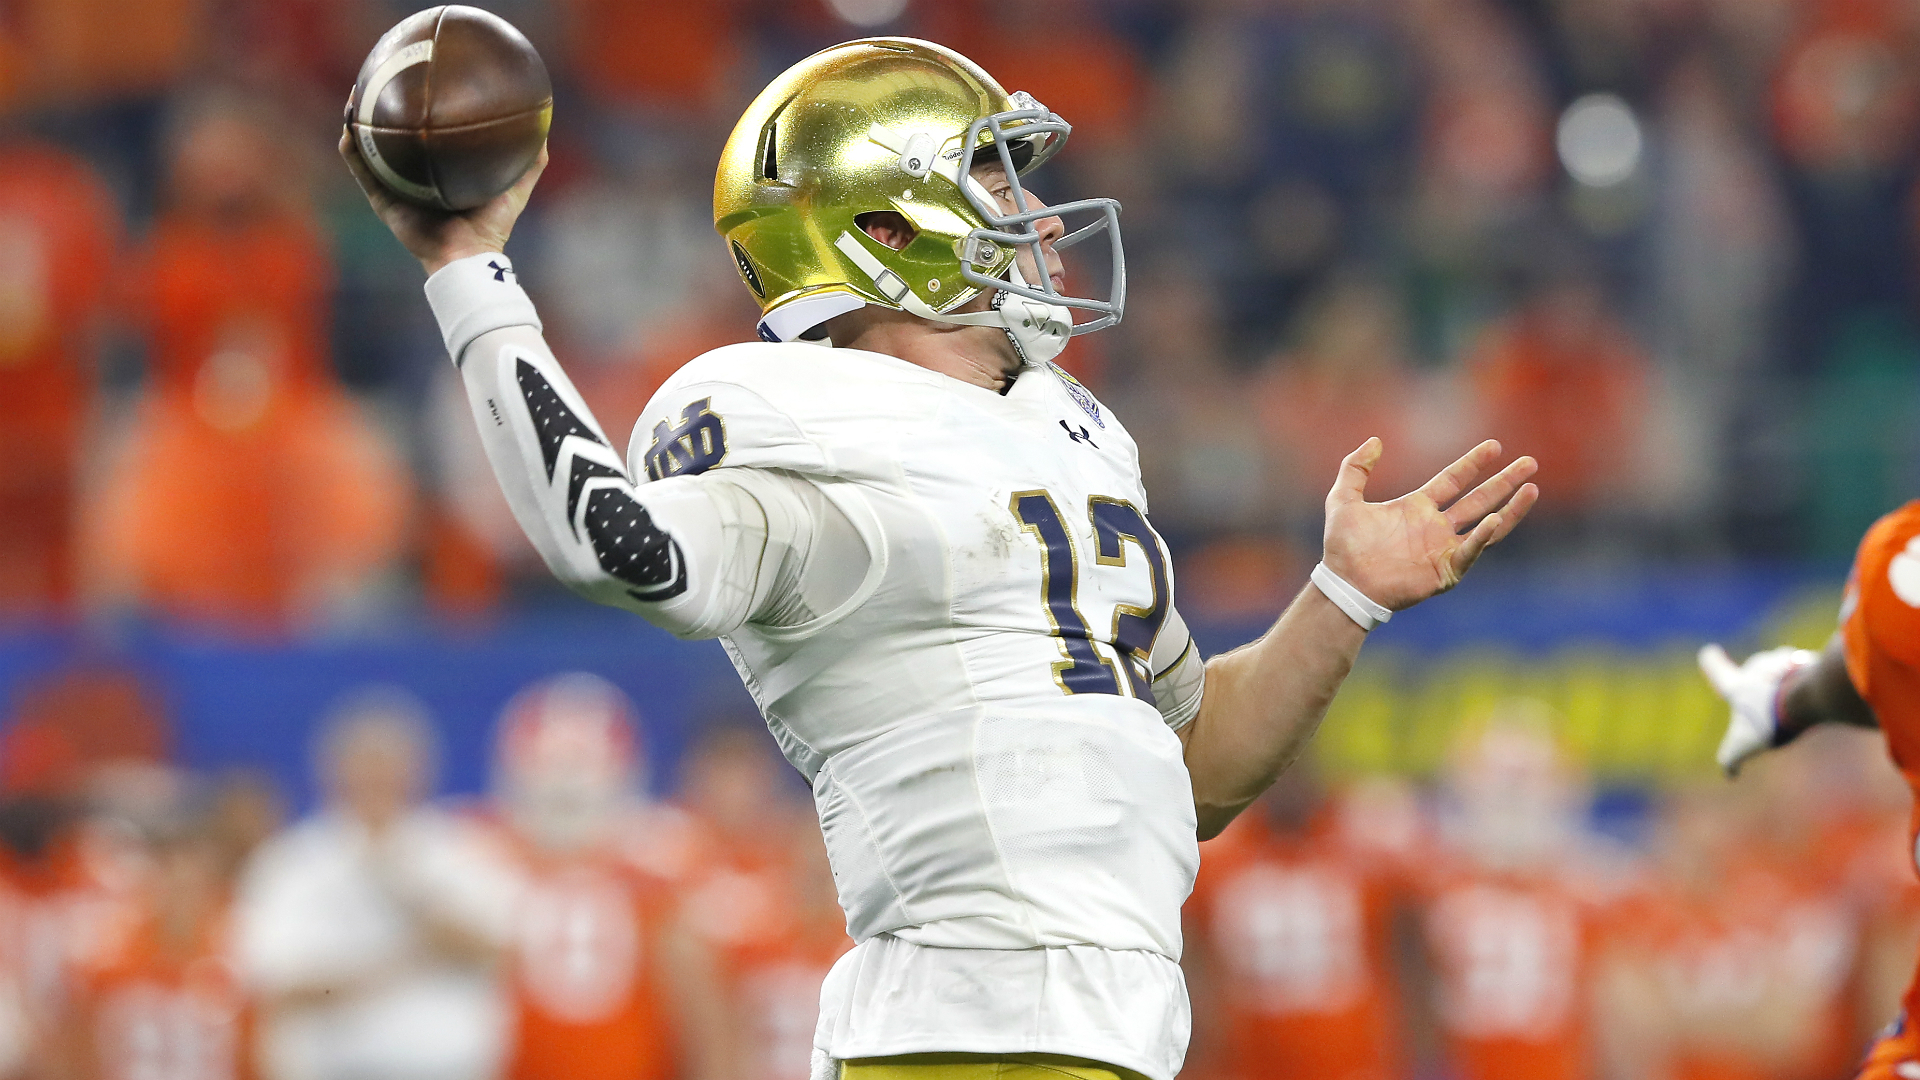 Notre Dame vs. Louisville Live score, updates, highlights from